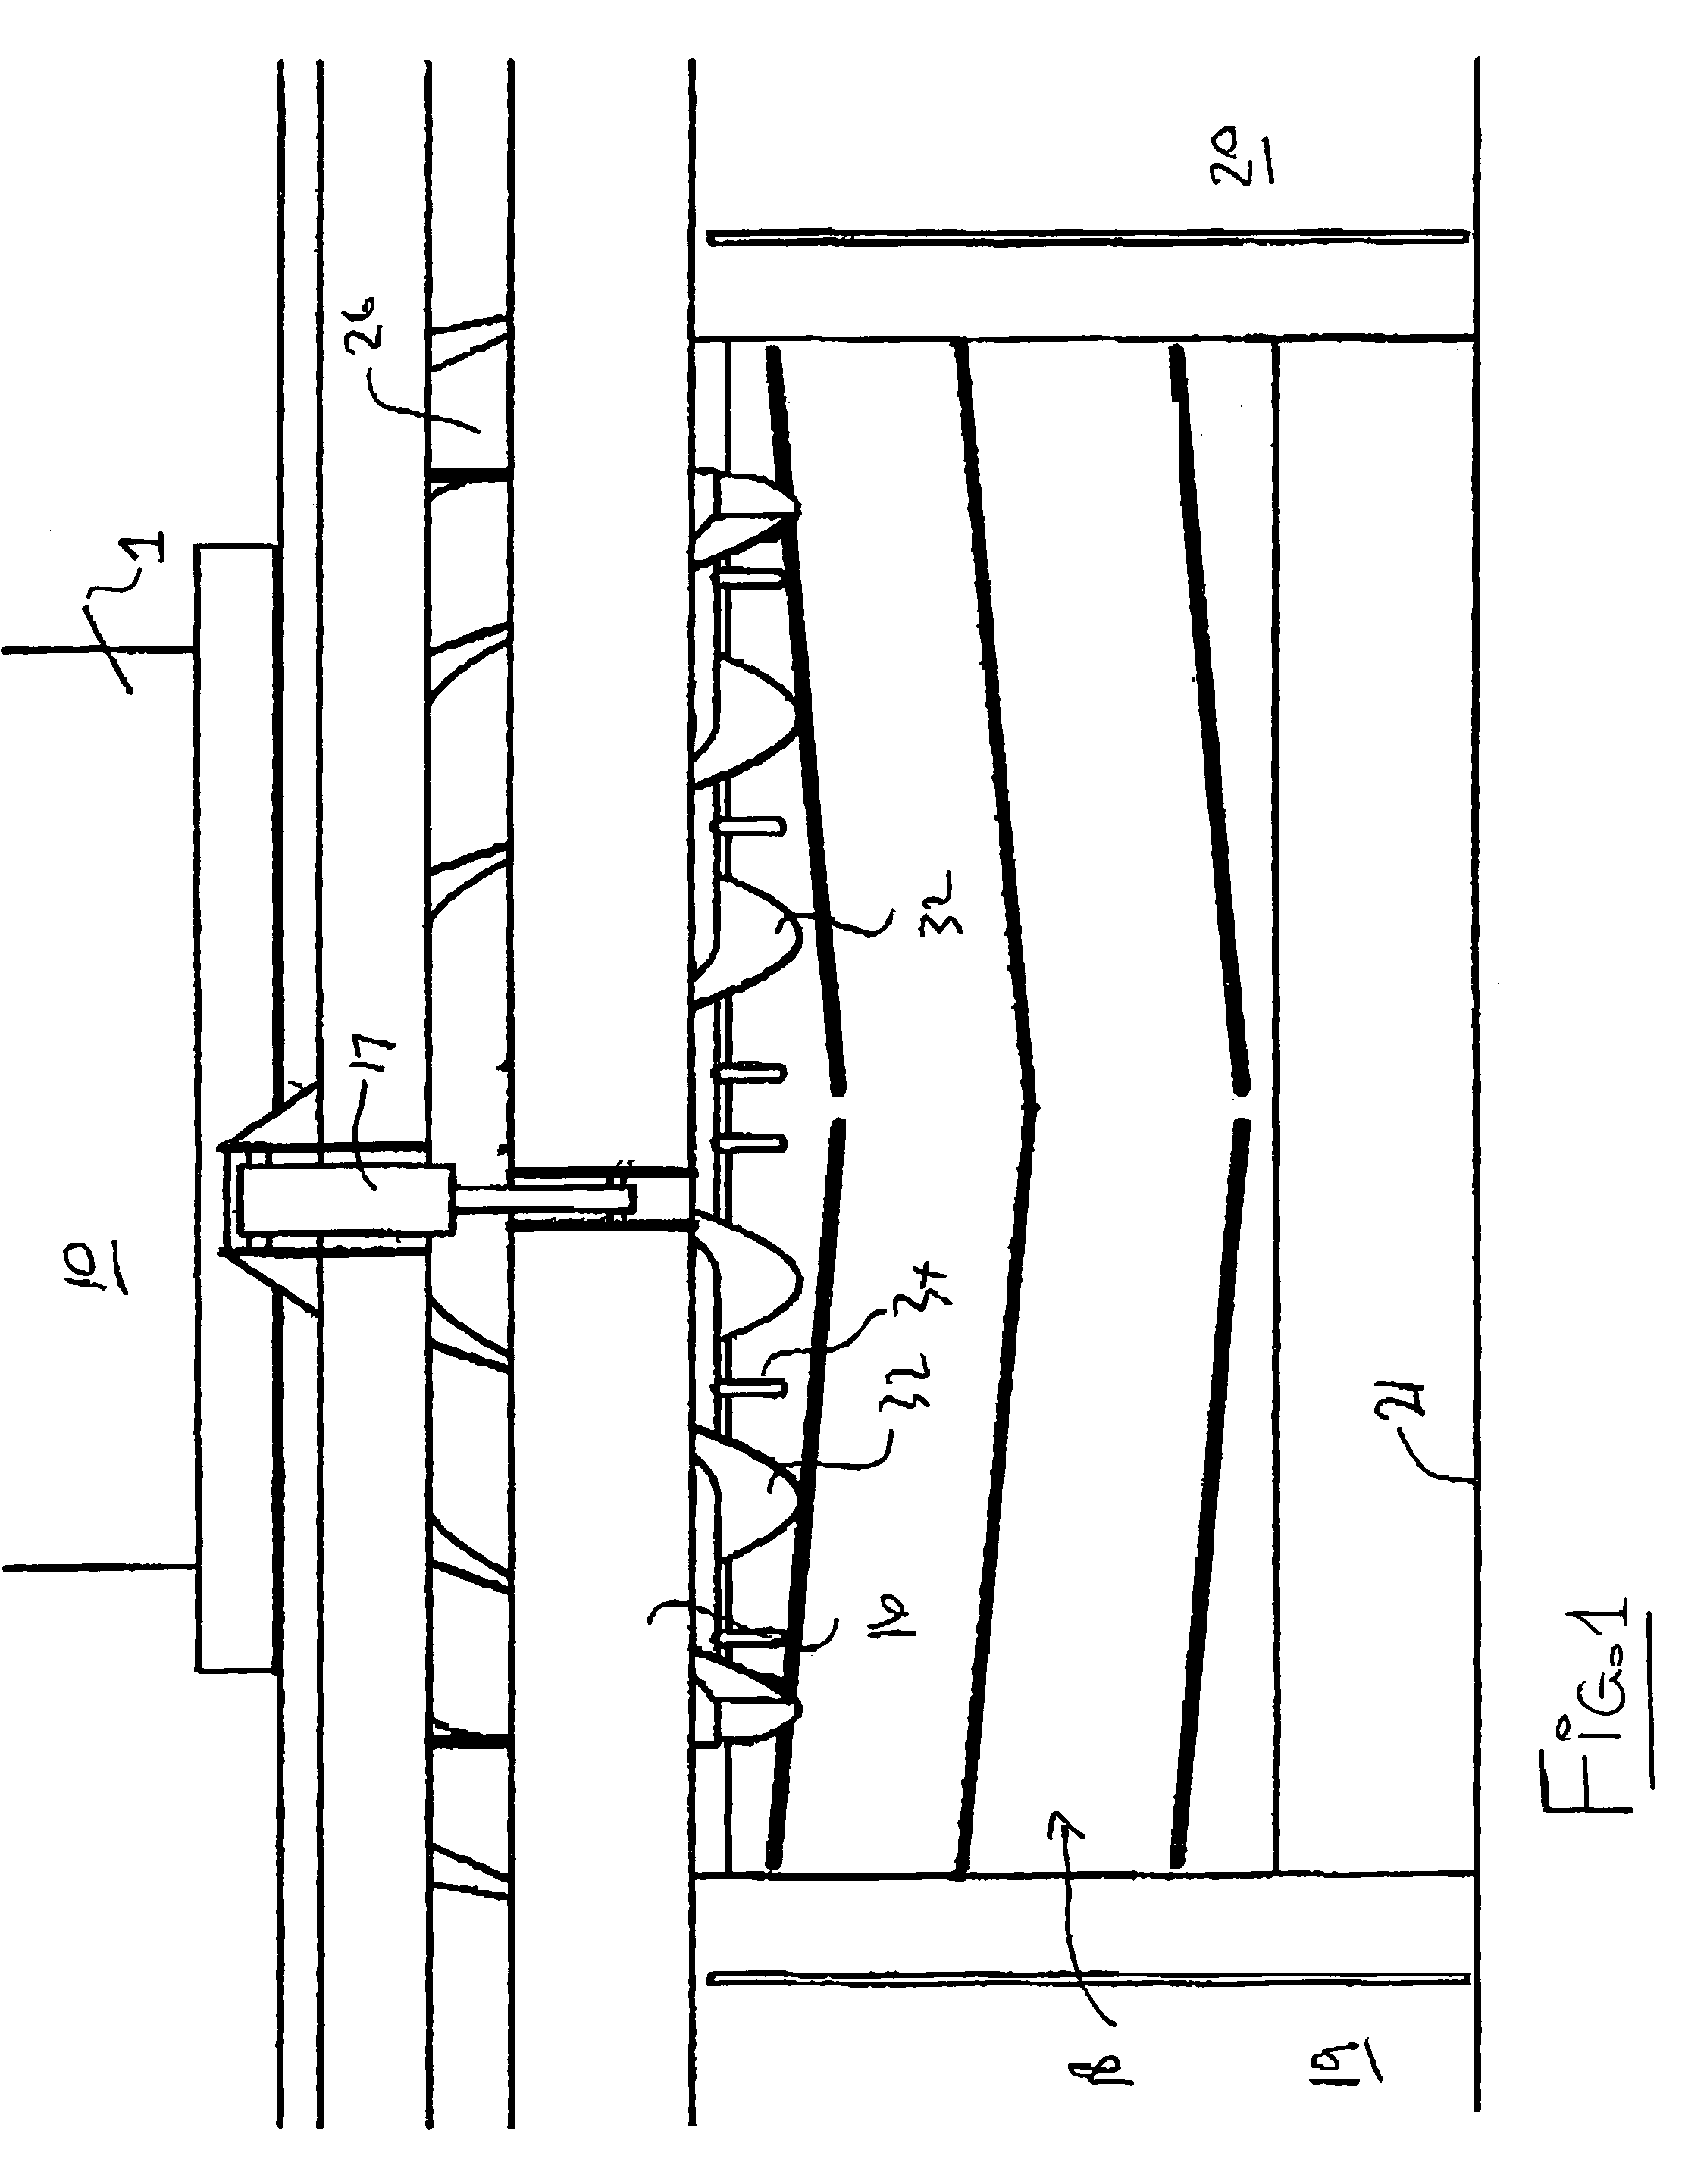 Reversible feed roller with radially extendible fingers